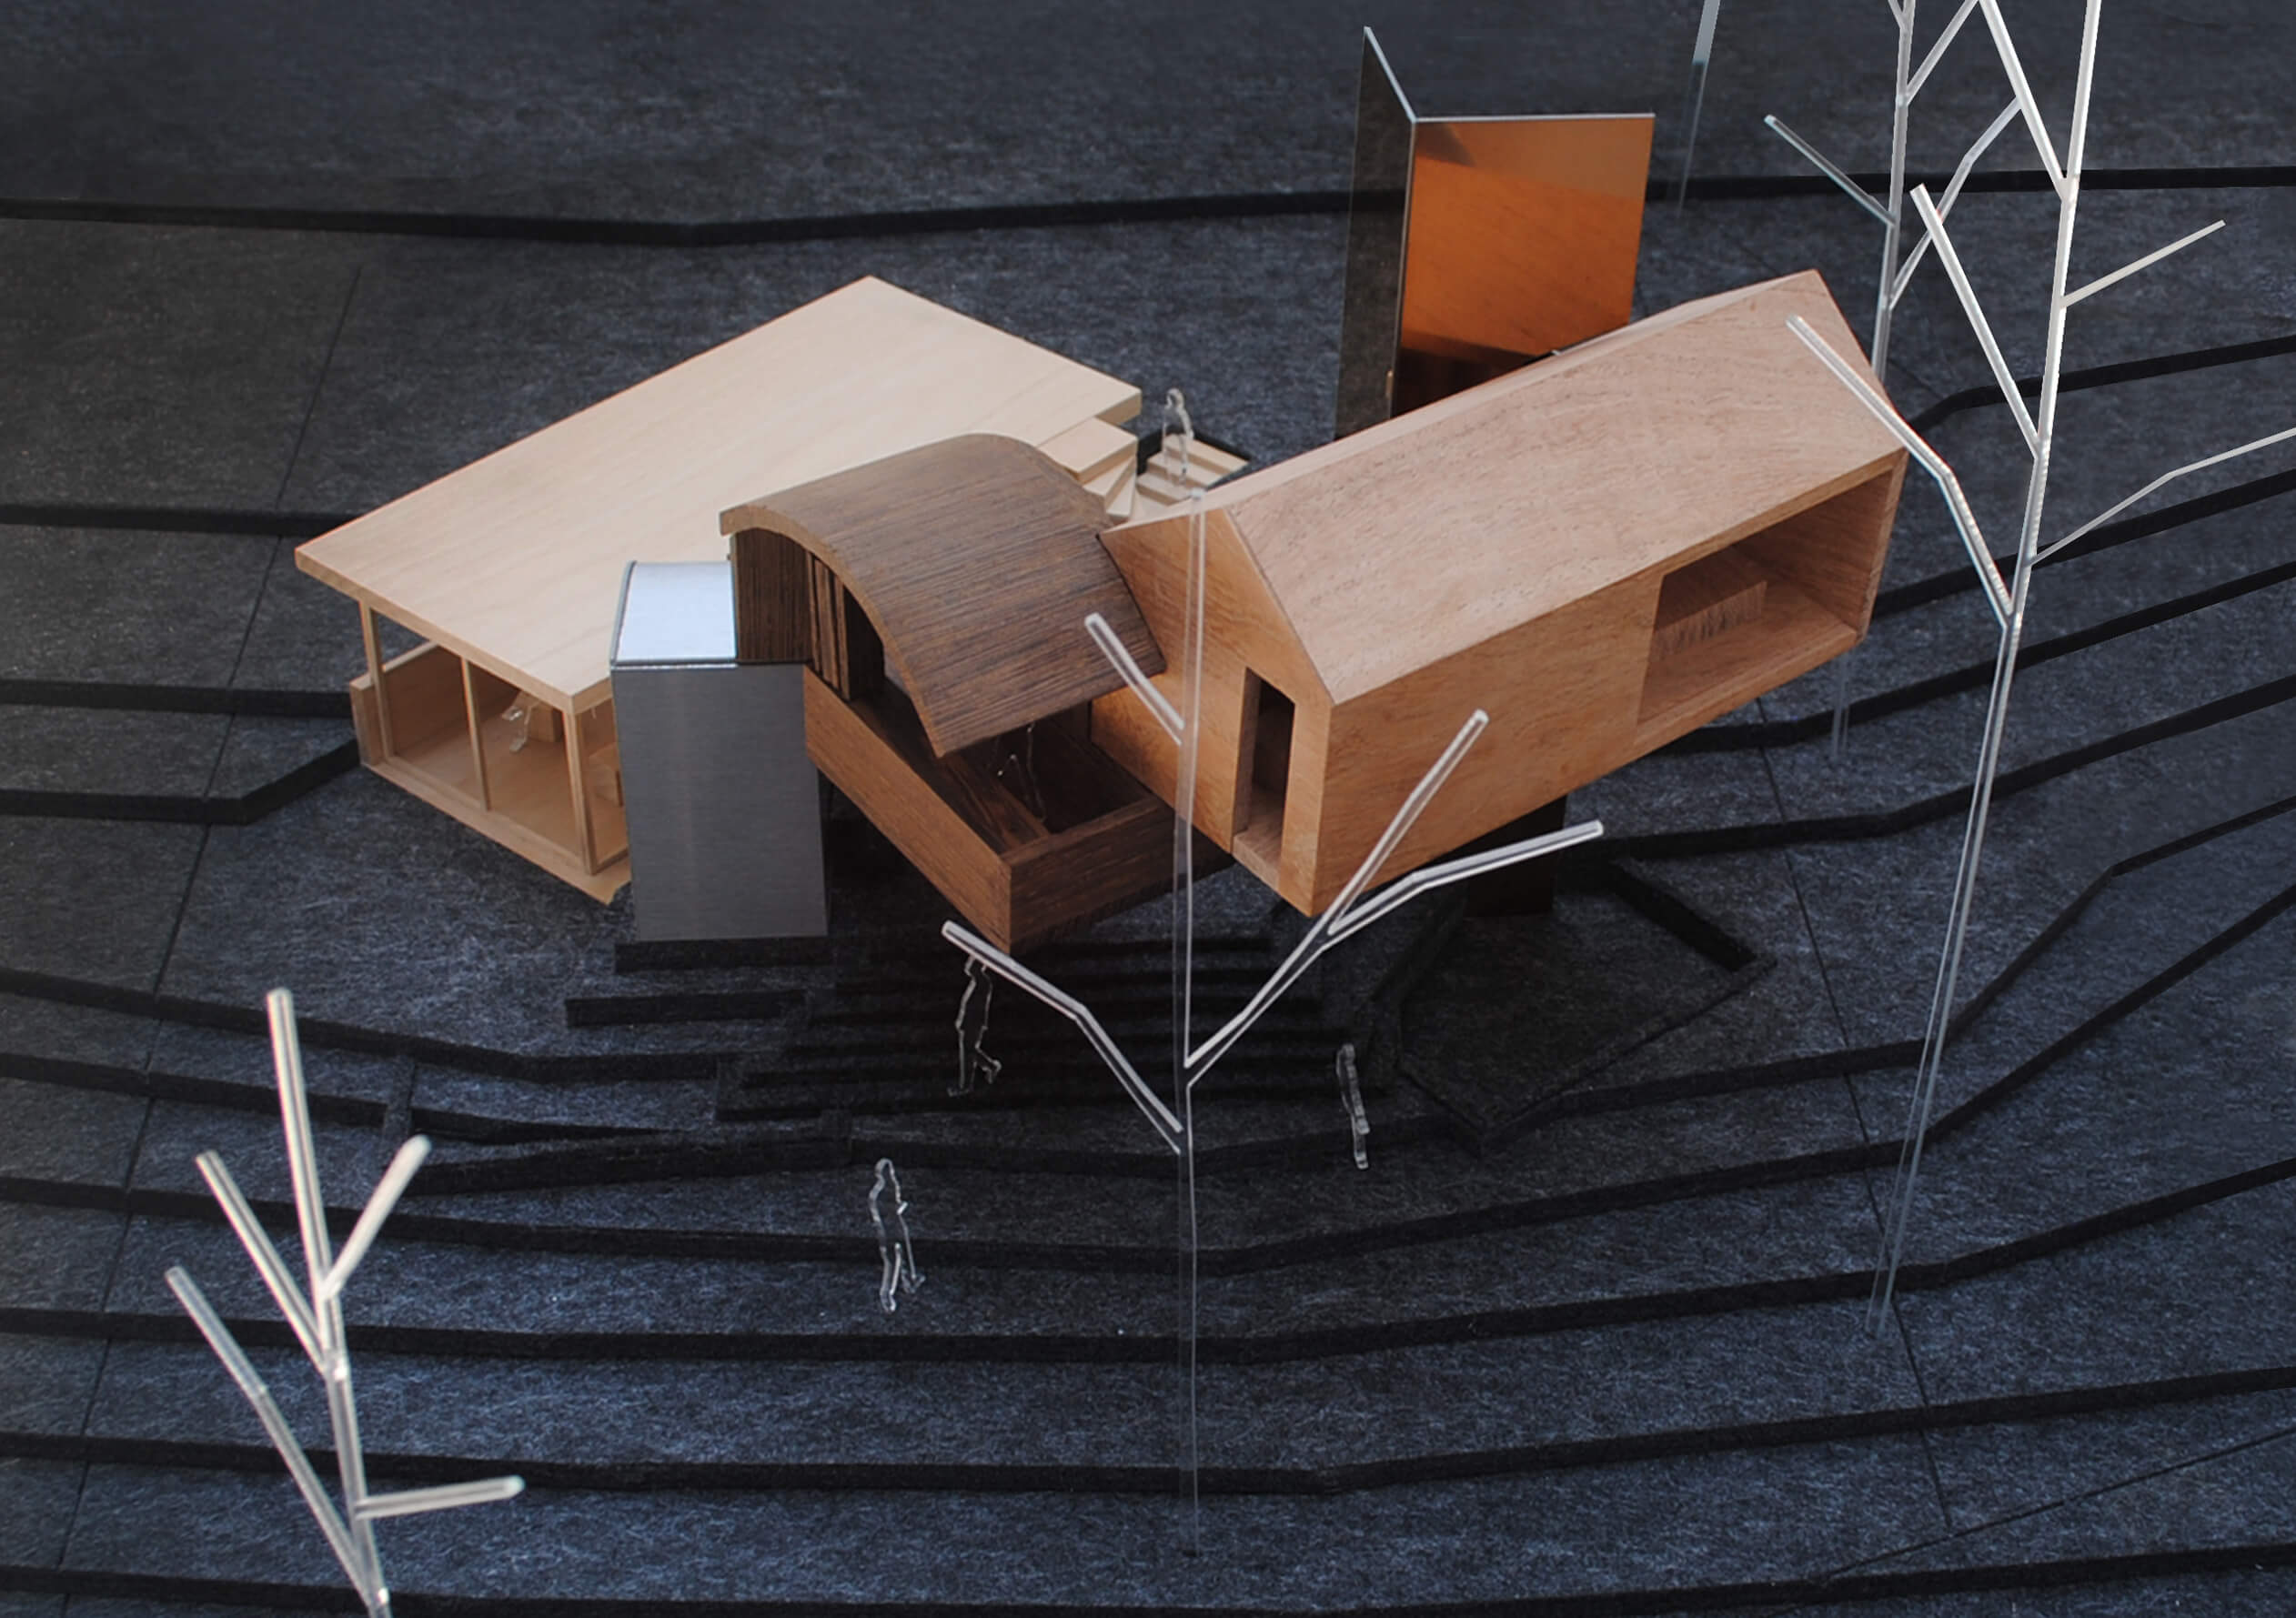 A model of intersecting houses by a tree from tatiana bilbao ESTUDIO